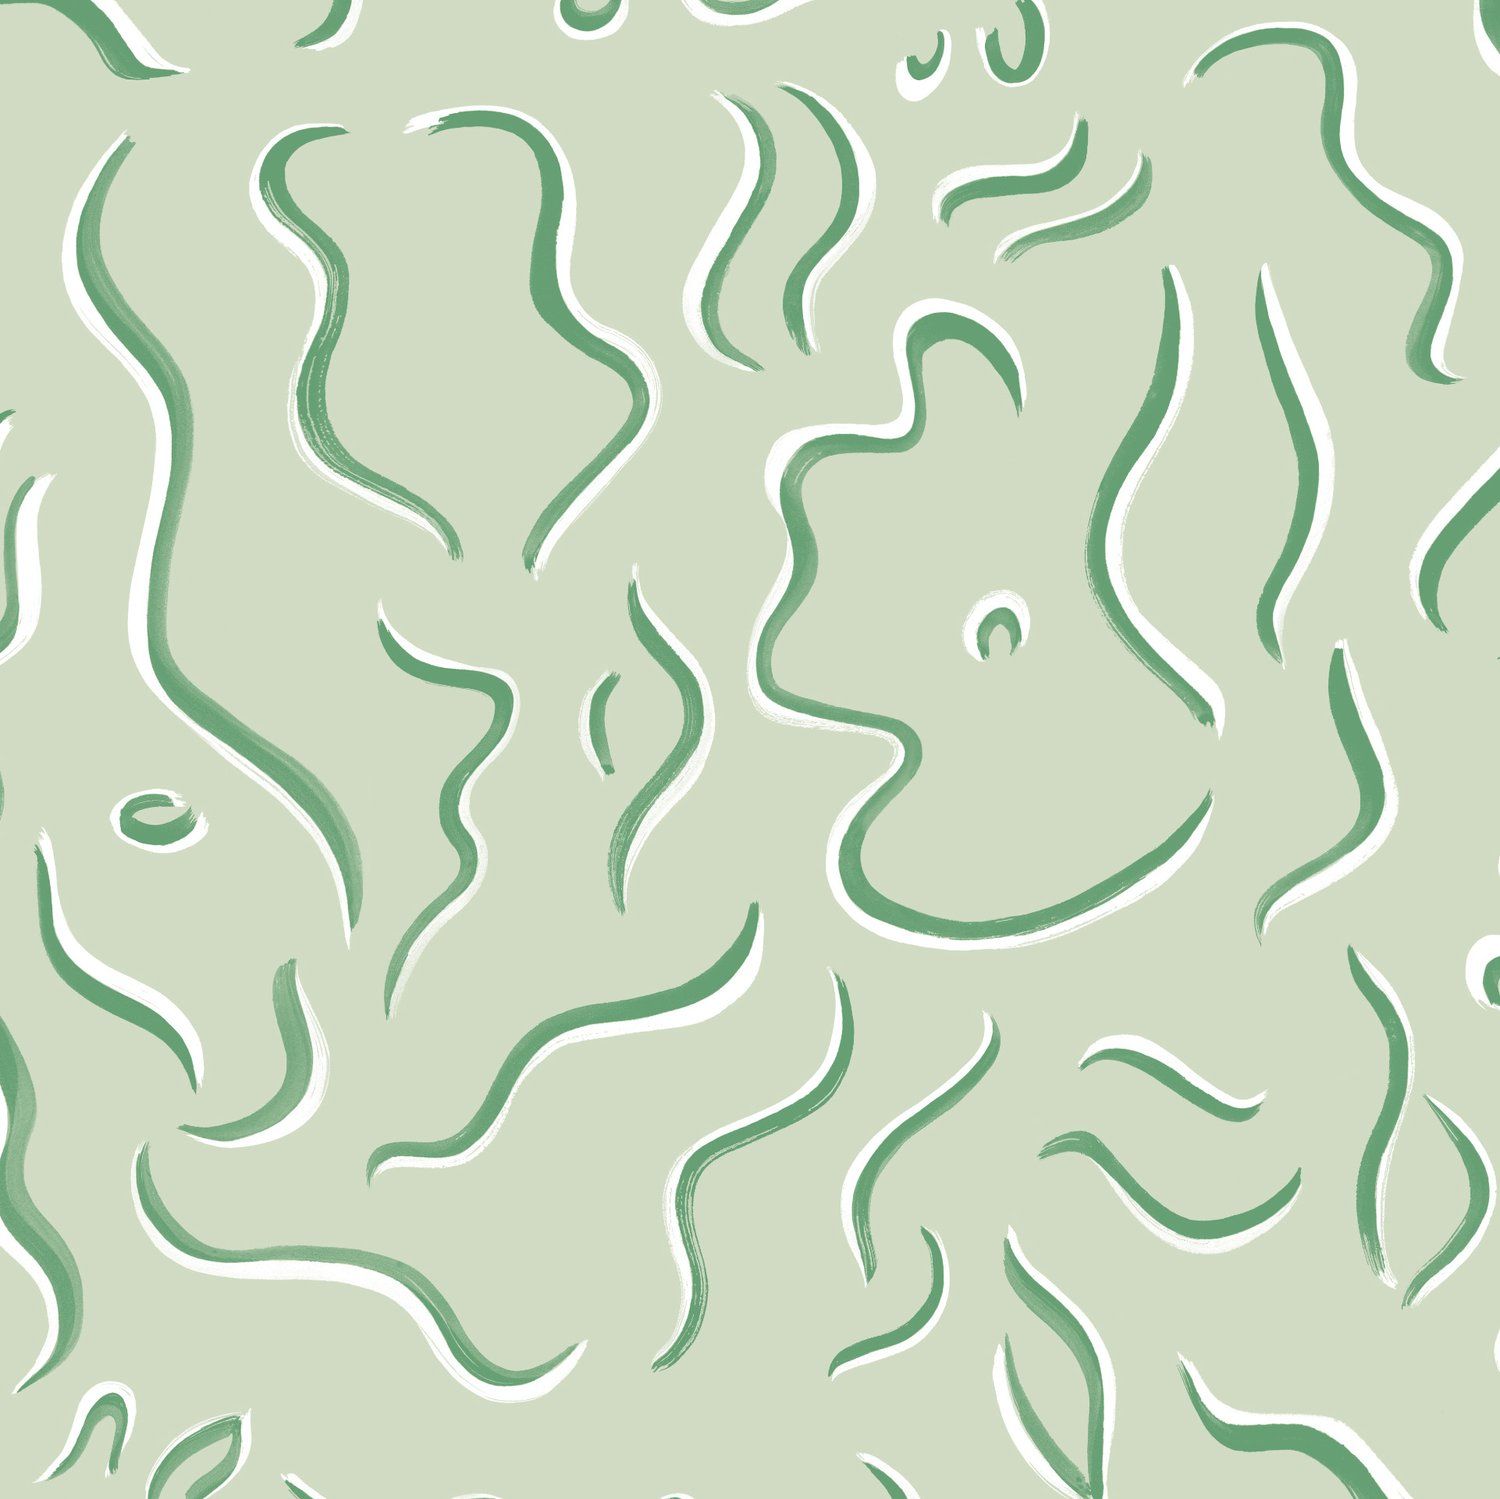 A pattern of green squiggles on a pale green background - Pastel green